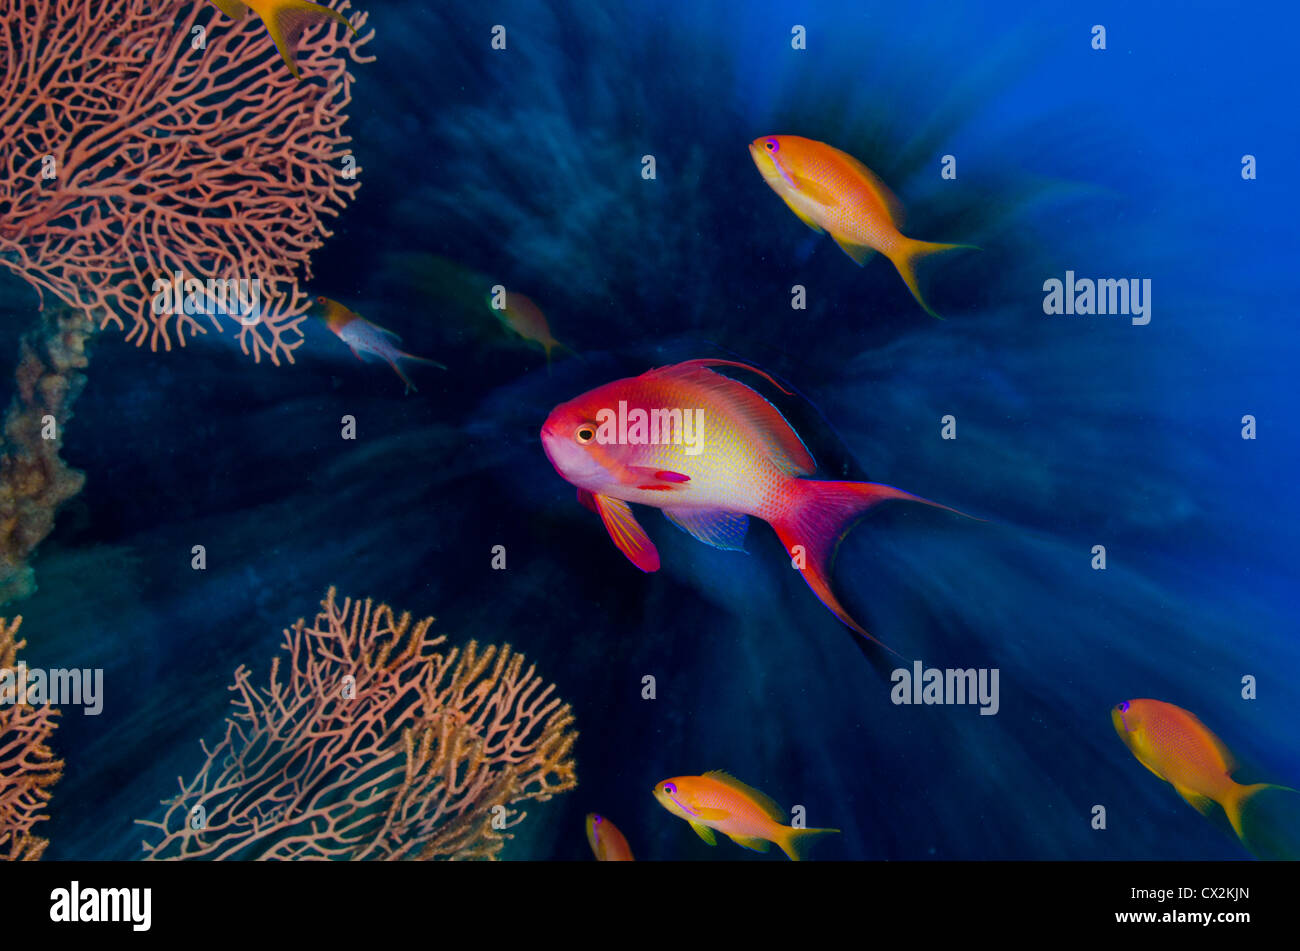 Red Sea, underwater, coral reef, sea life, marine life, ocean, scuba diving, vacation, water, fish, anthias fish, zoom, action Stock Photo